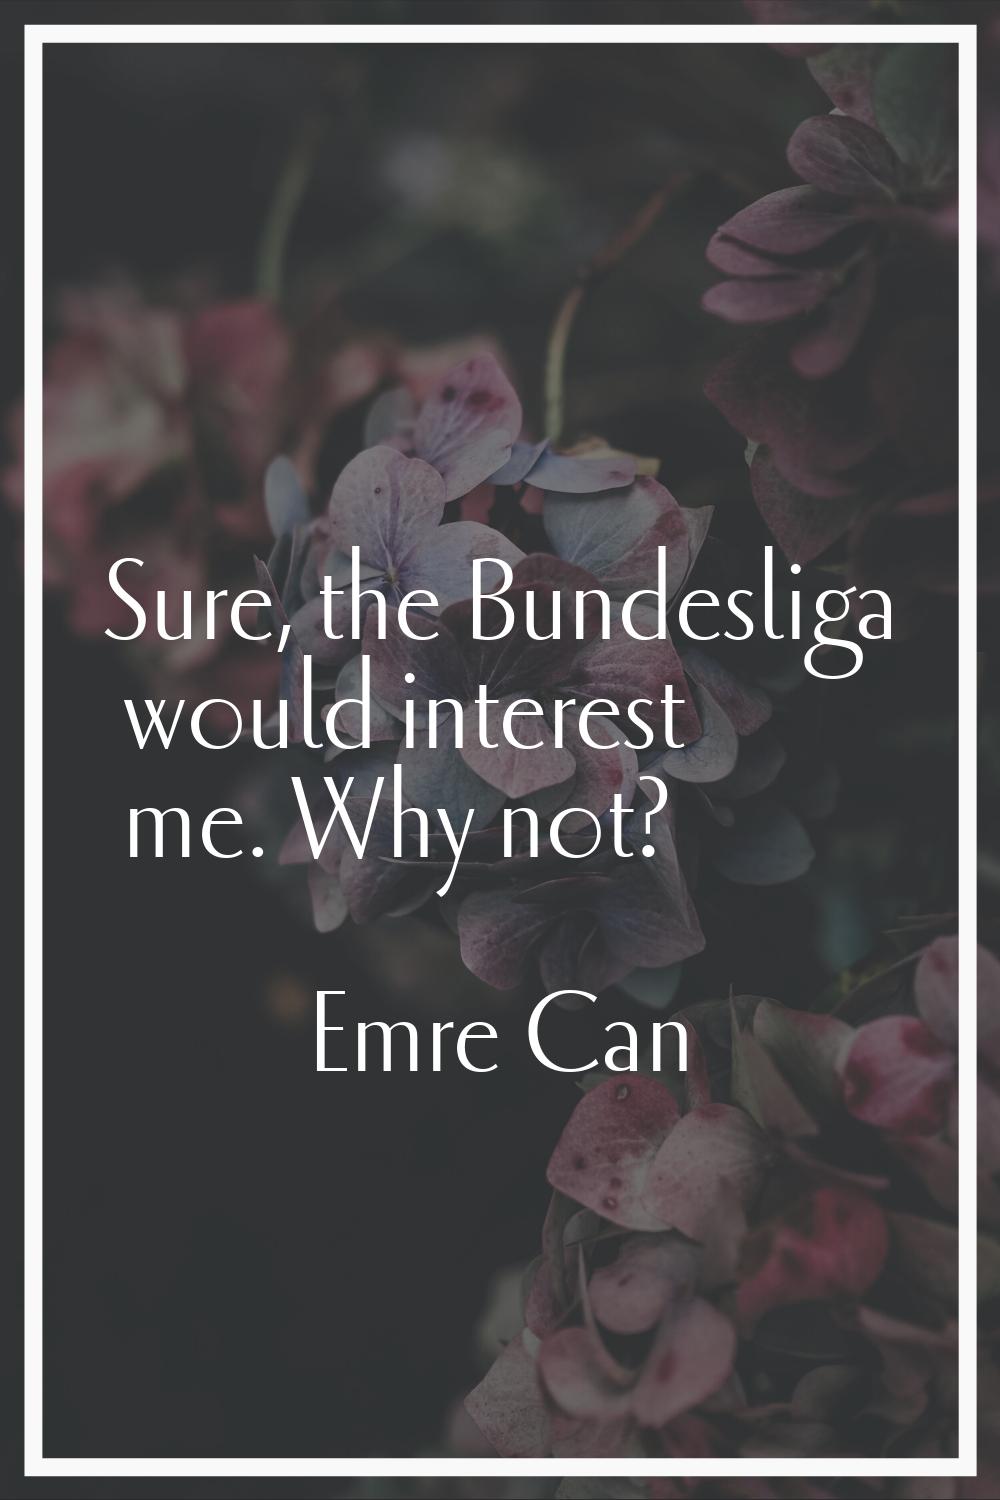 Sure, the Bundesliga would interest me. Why not?